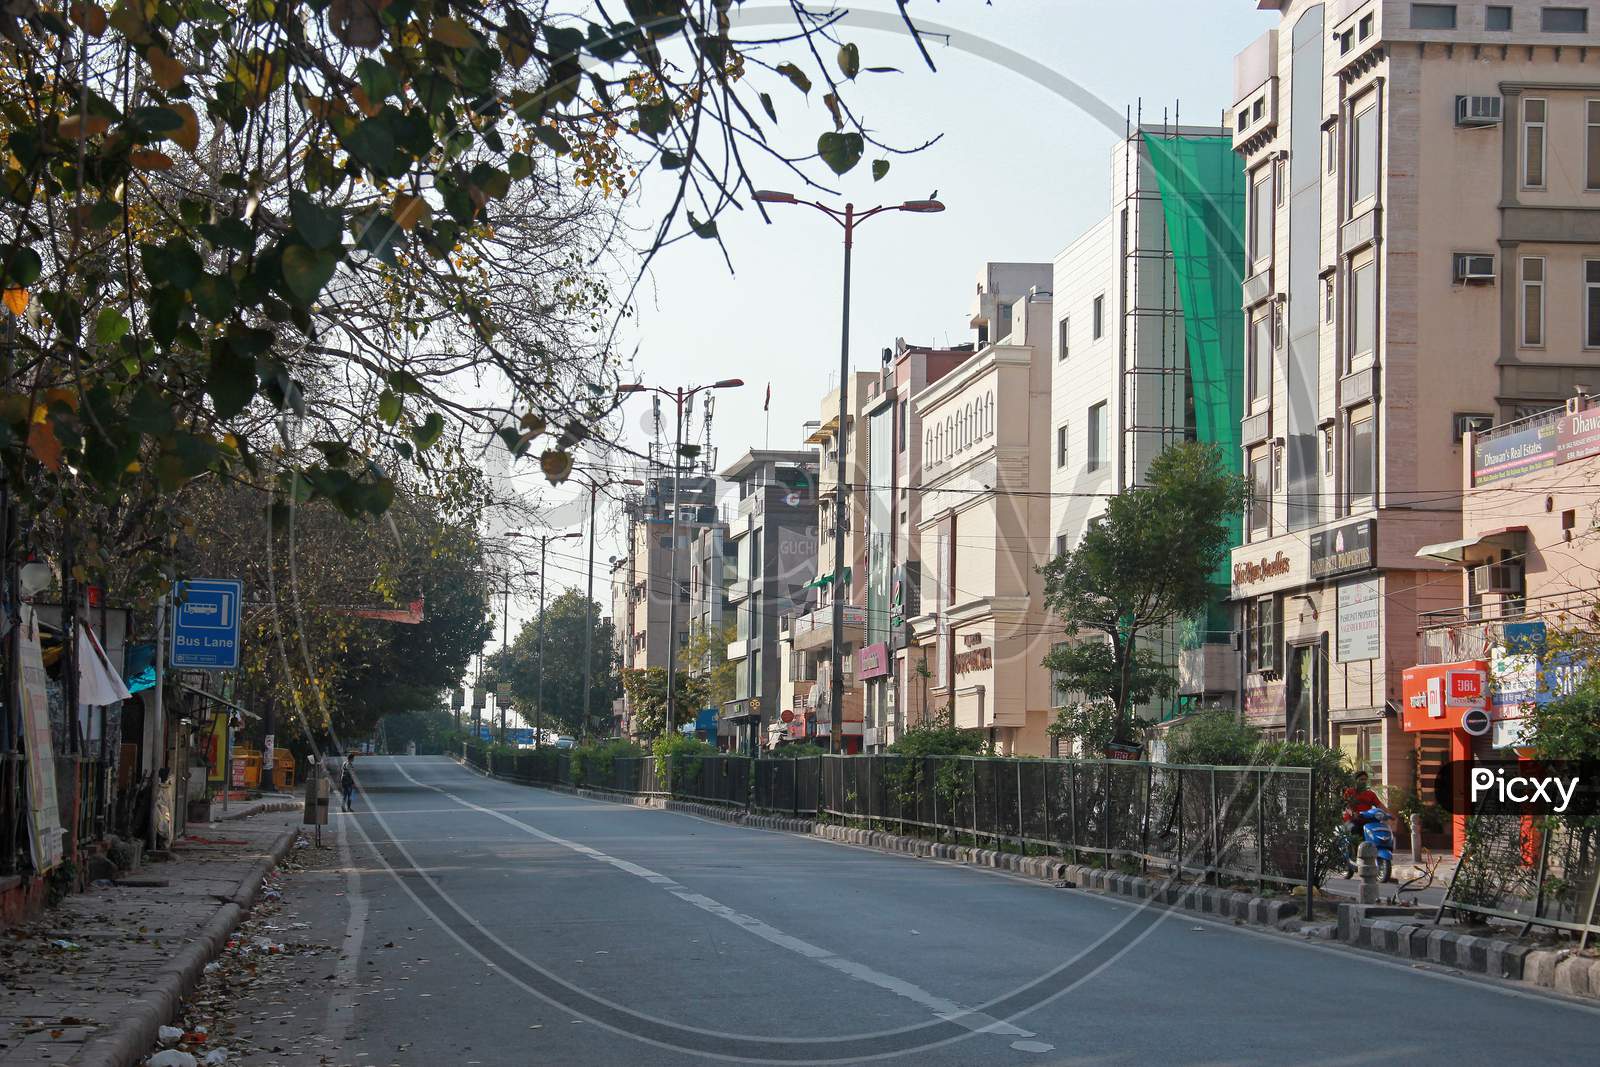 Janata Curfew, Deserted Roads in Delhi As Indian Prime Minister Narendra Modi Called For A 14 Hour Janta Curfew Or Self-Imposed Quarantine To Break The Highly Contagious Covid 19 Or Corona Virus Spread